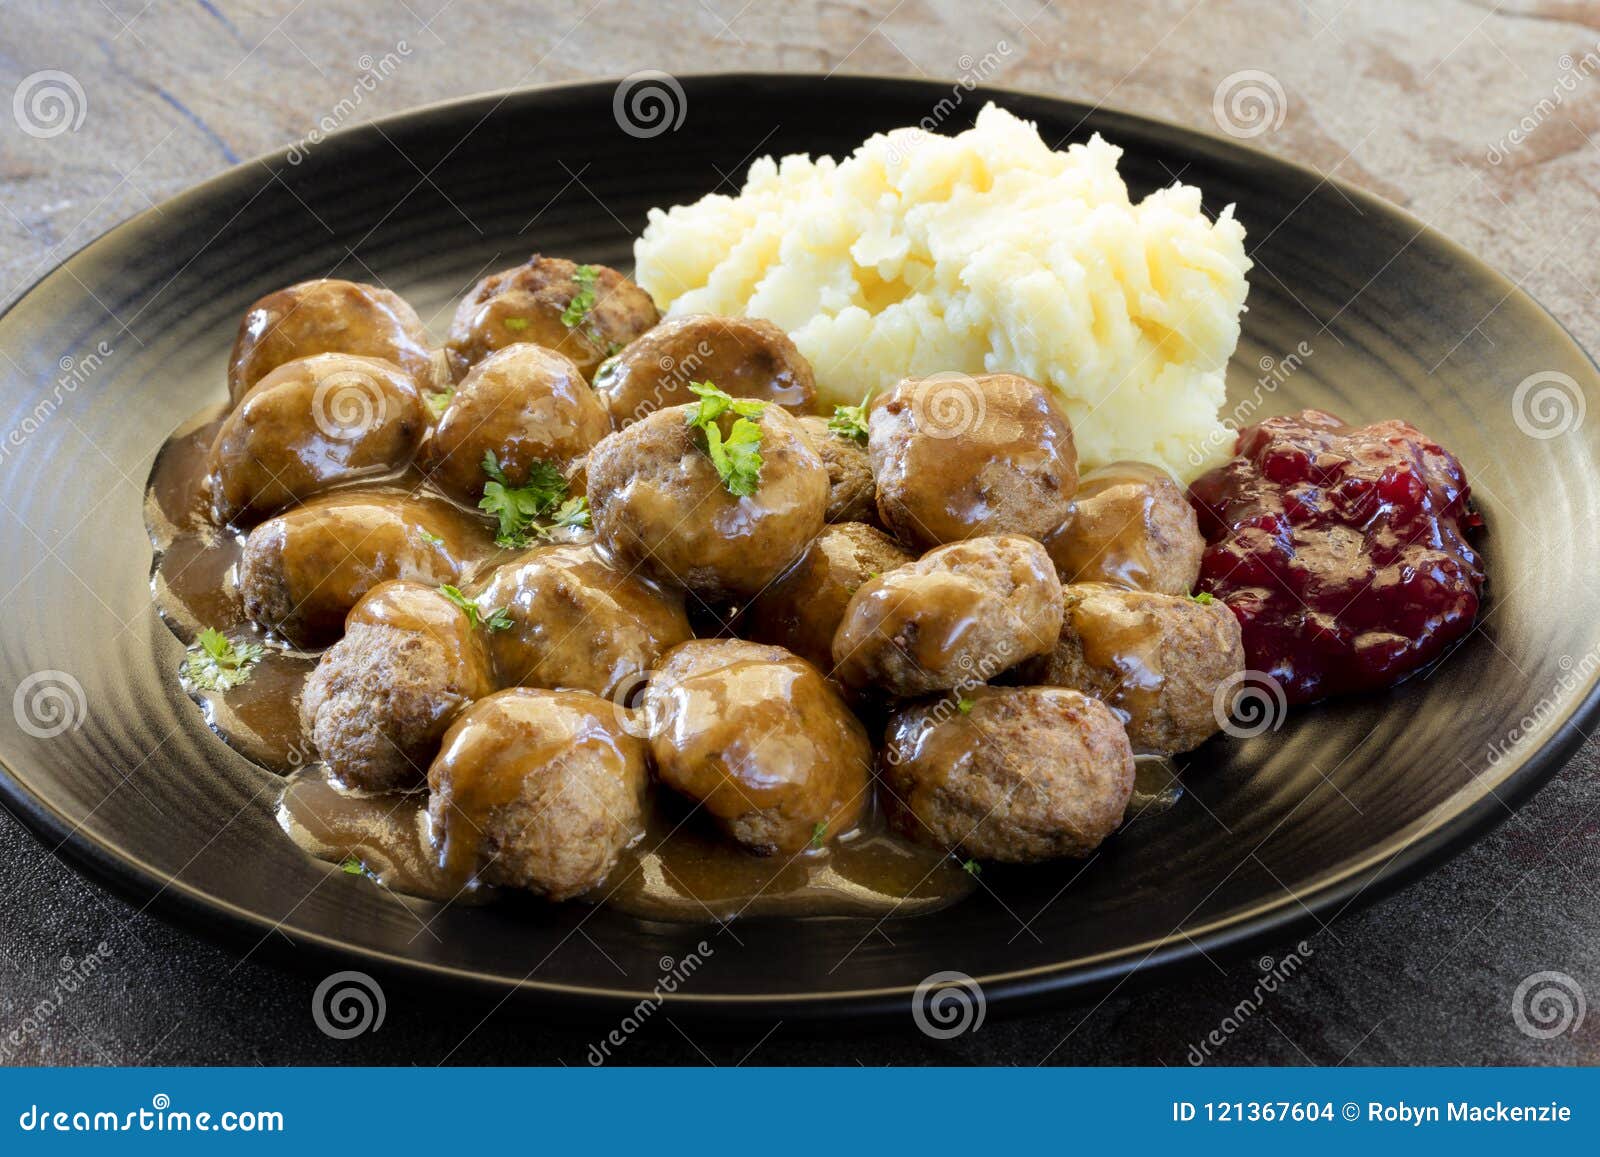 swedish meatballs with lingonberry on black plate over slate